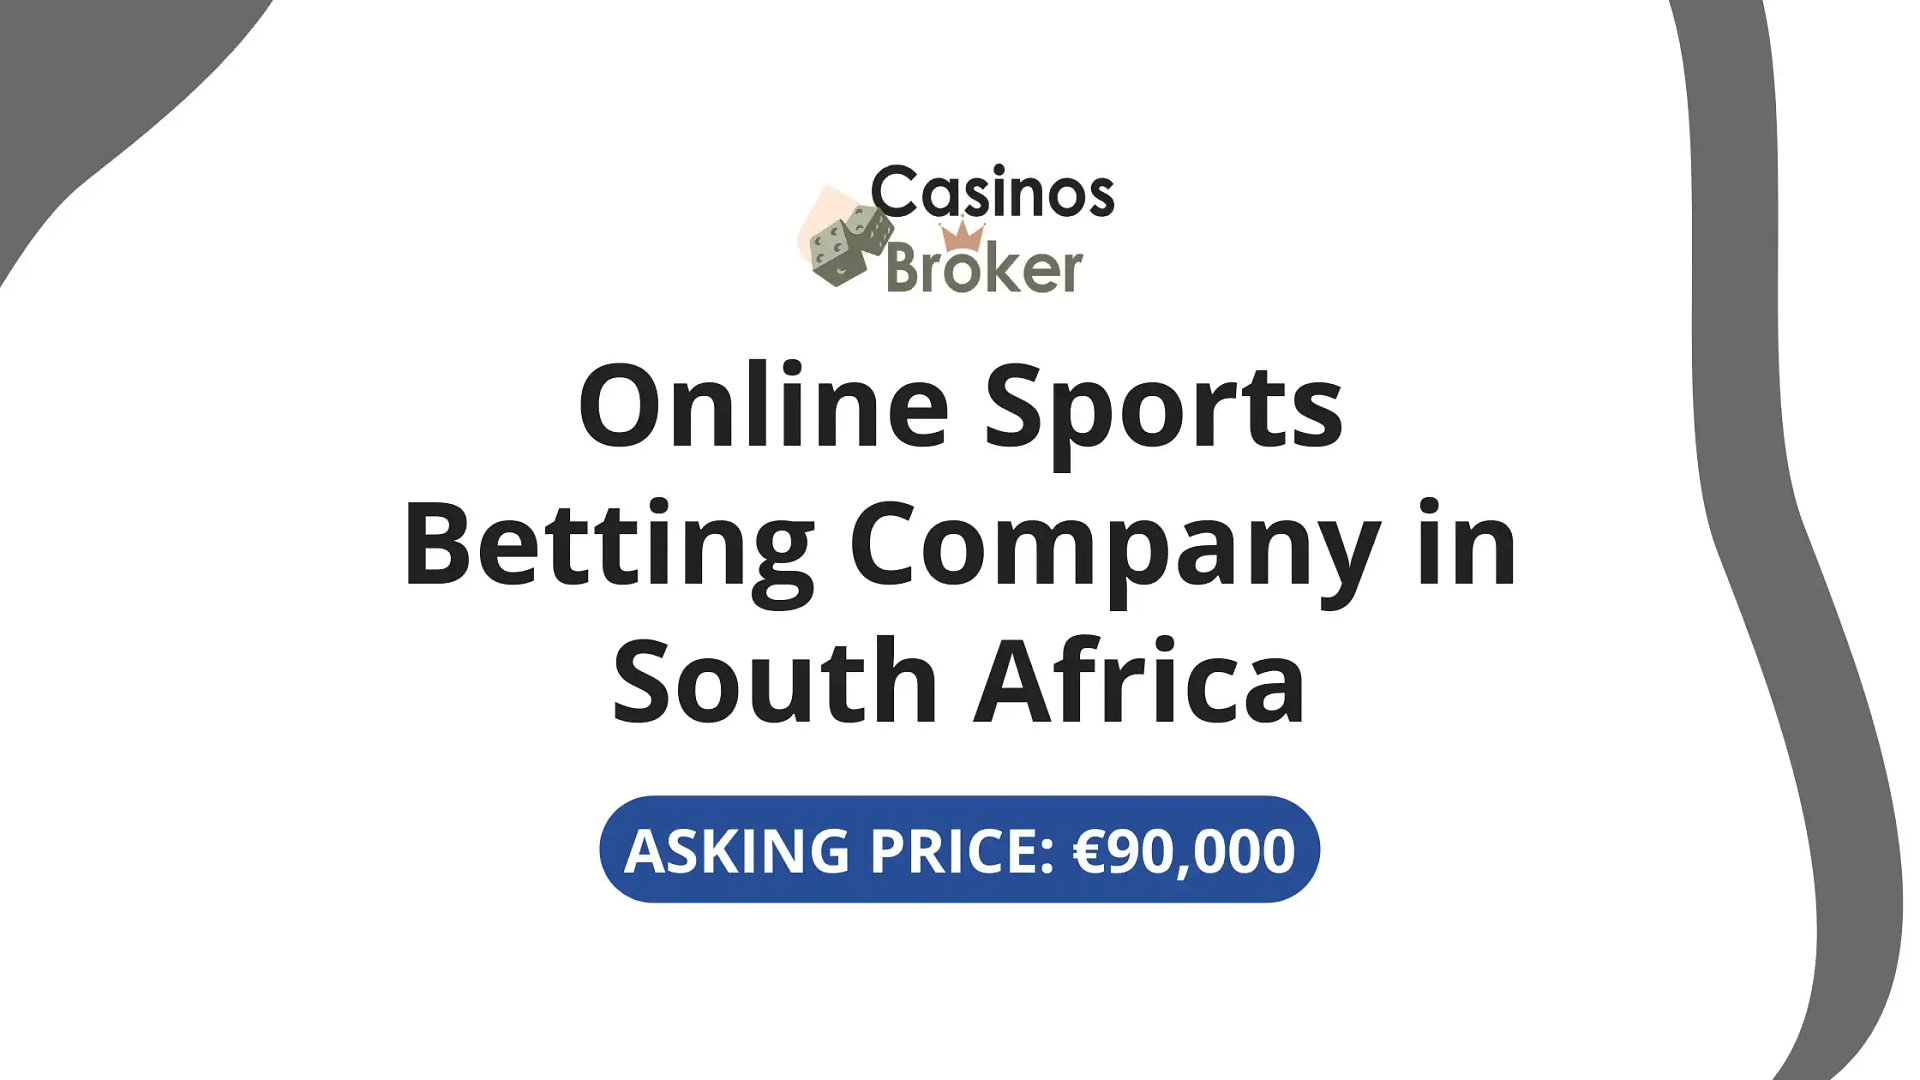 Online Sports Betting in South Africa - Asking price €90,000